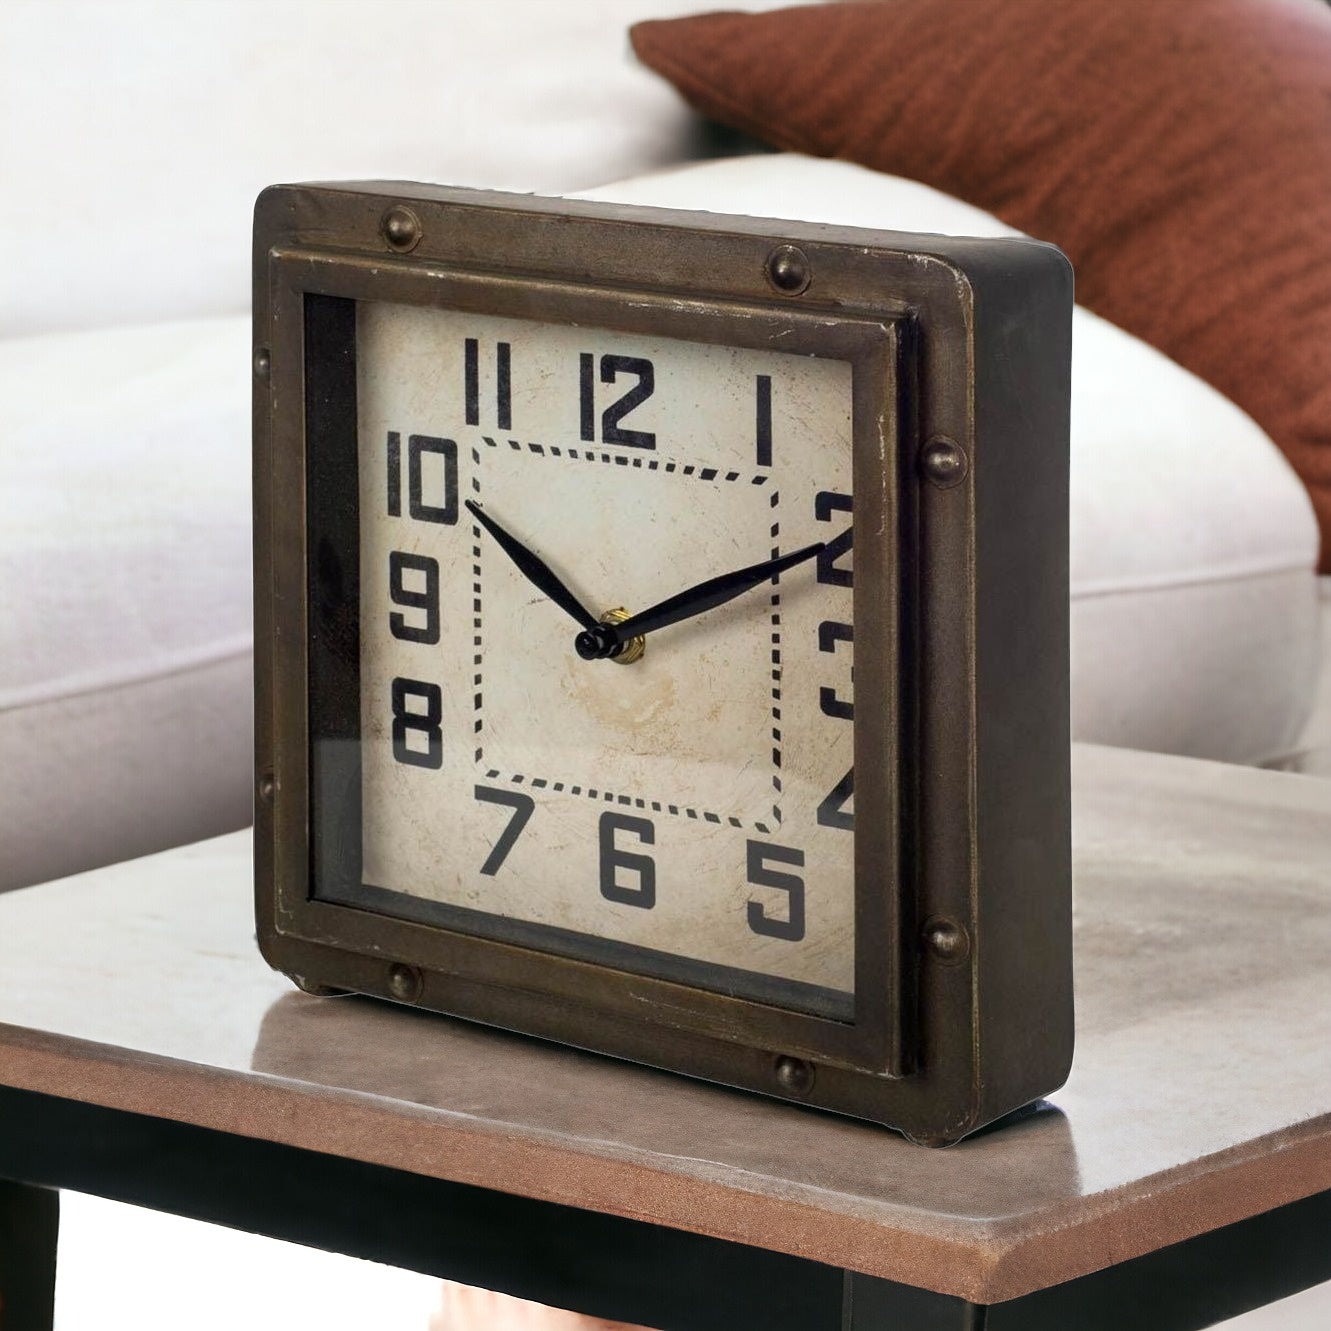 Square  Bronze Toned Metal Desk Table Clock With Traditional Black Numbers And Hands